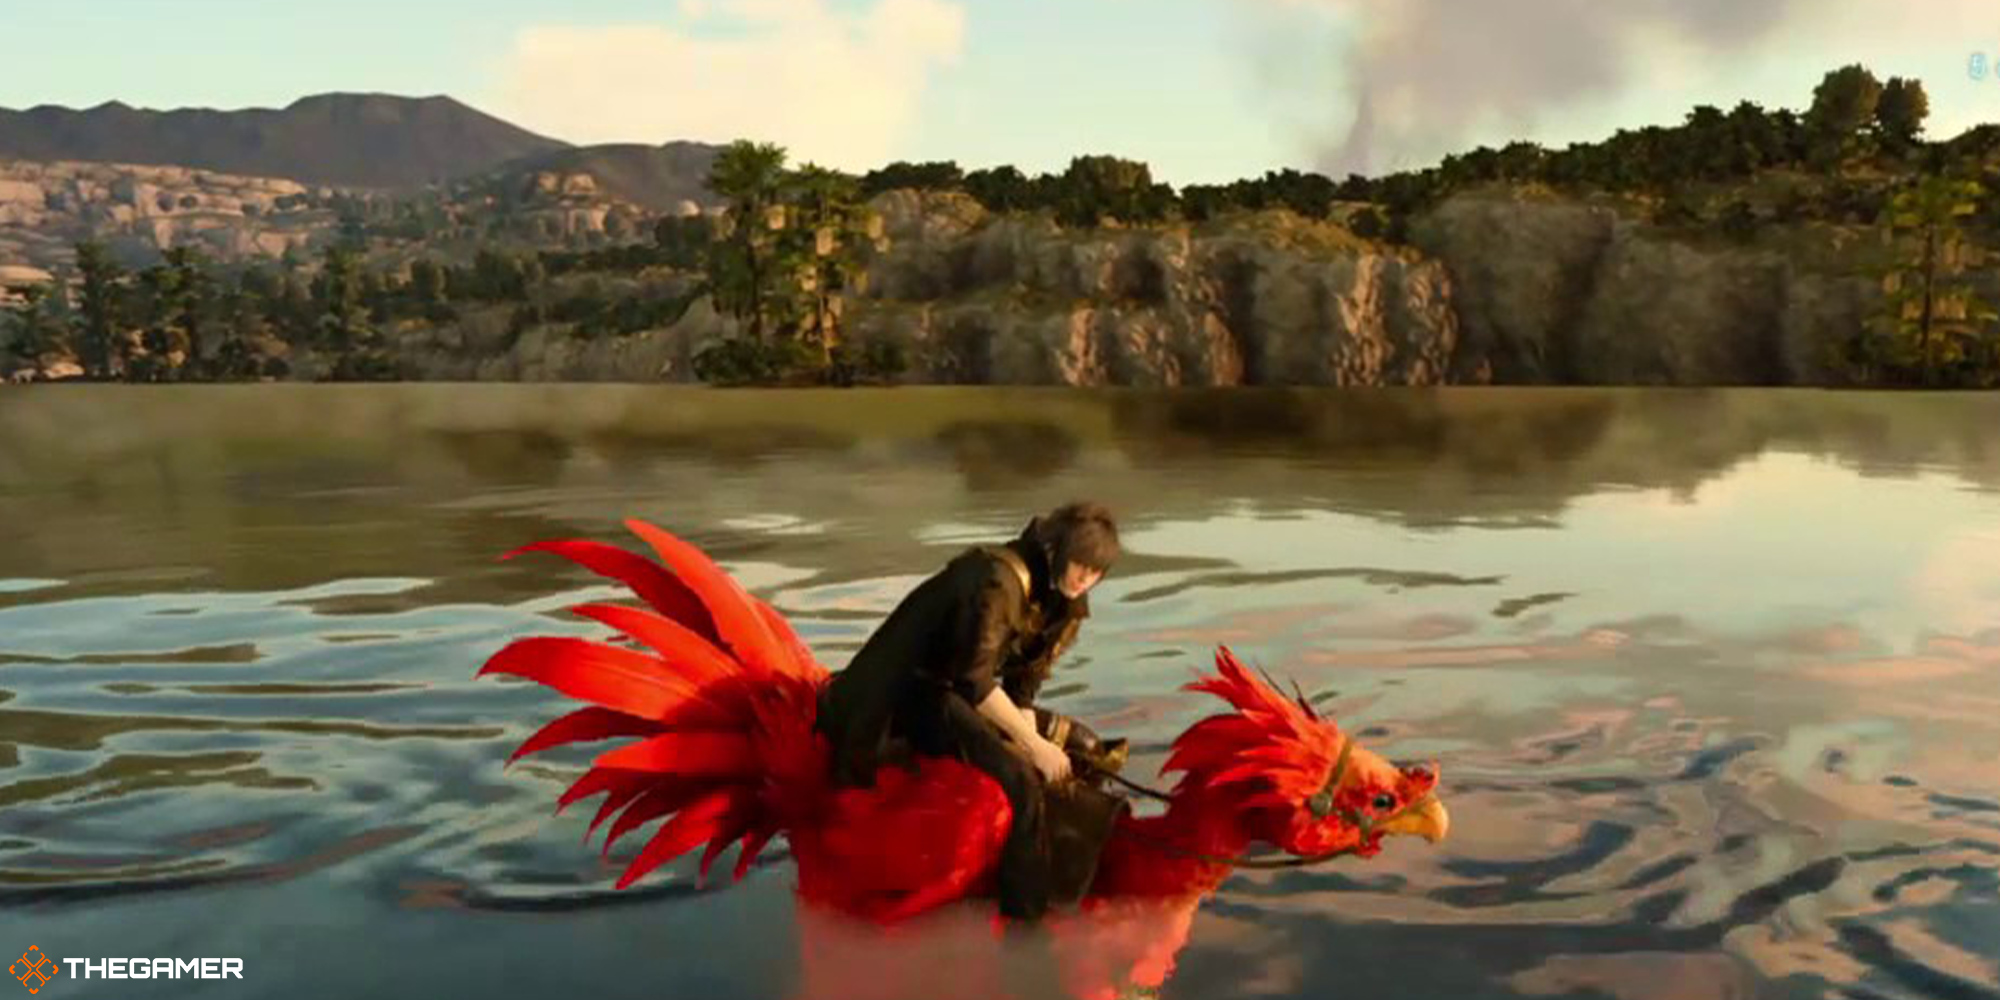 Final Fantasy XV - Noctis on his Chocobo going to the vesperpool islet